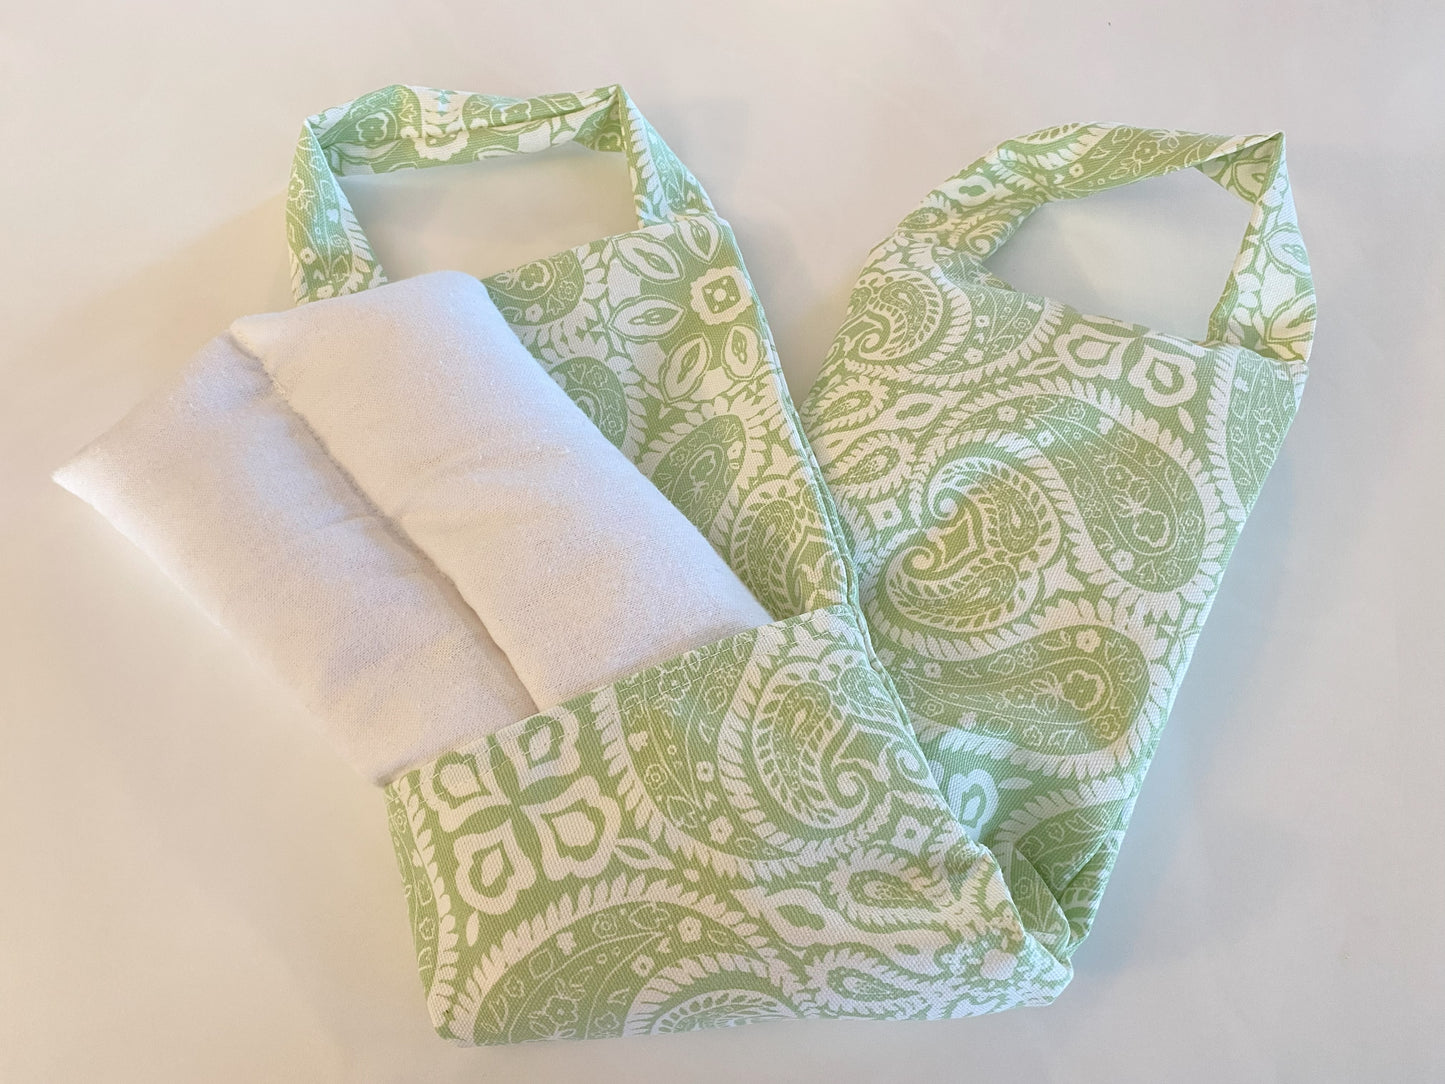 Washable Microwavable Rice Bag with Handles l Comfort Therapy Pack l Neck Wrap l Aromatherapy bag l Paisley